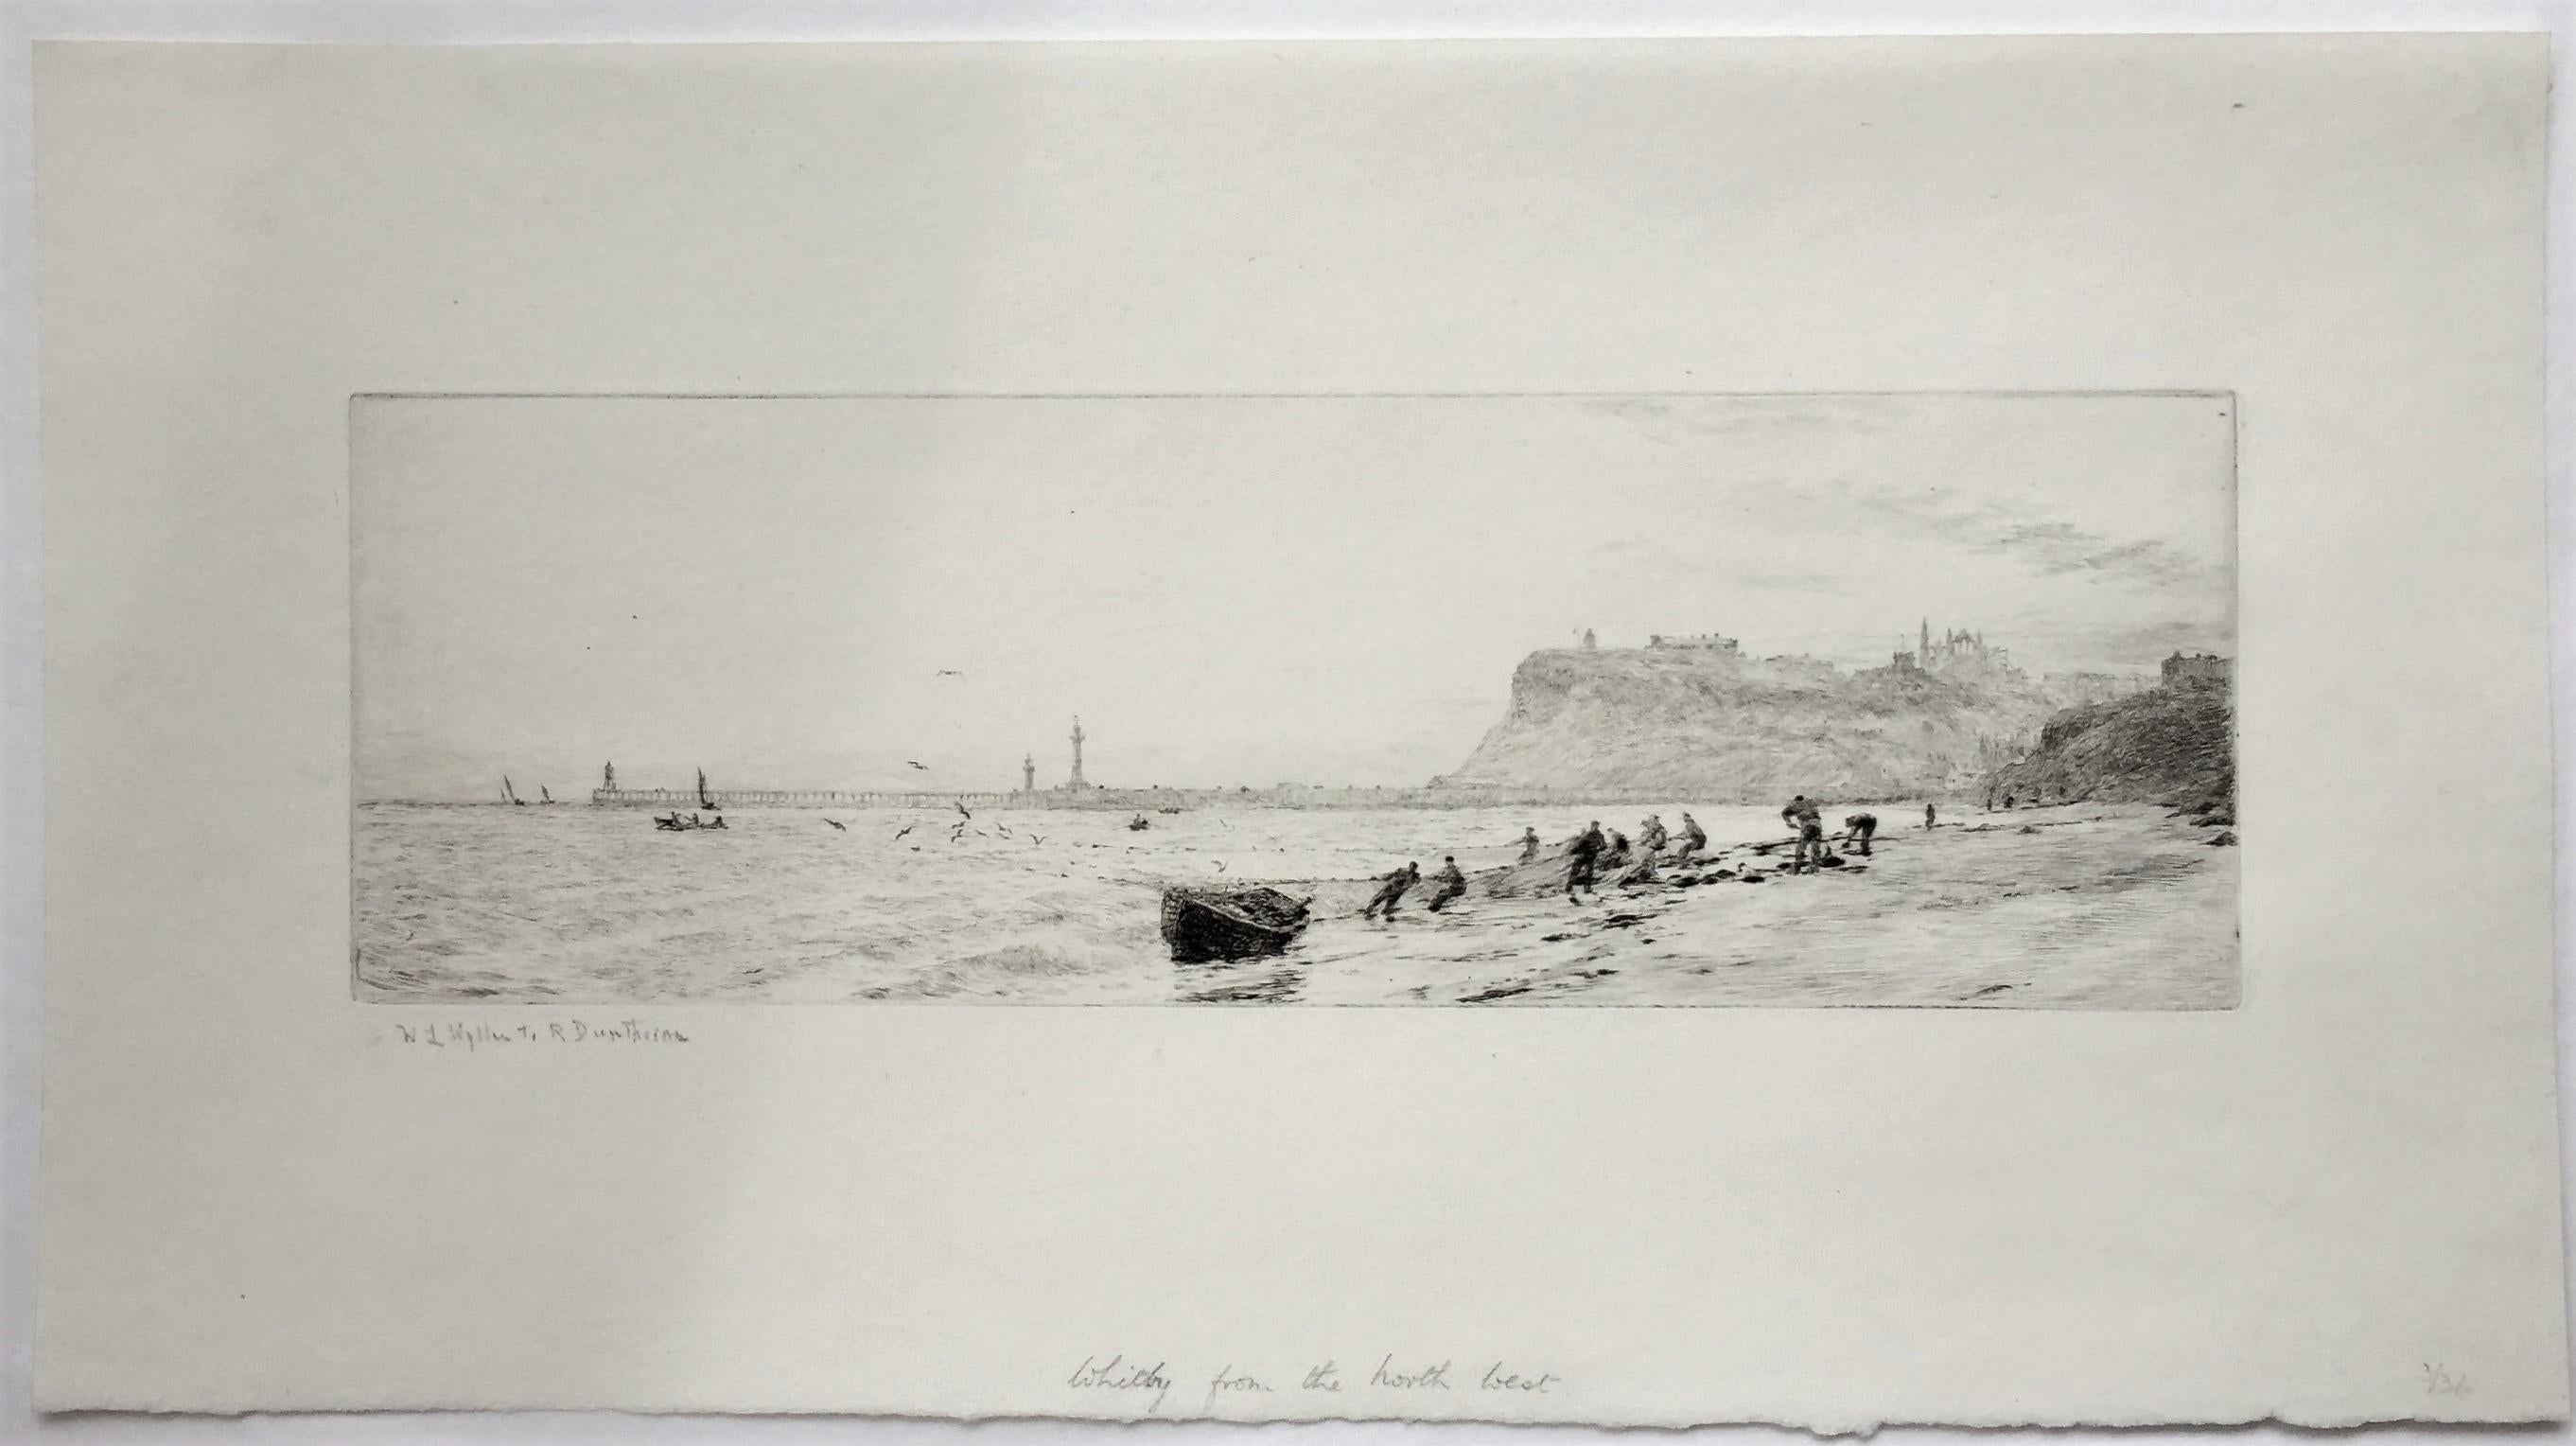 Whitby from the North-West. c. 1928. Etching and drypoint. 4 1/4 x 12 3/4 (sheet 9 3/8 x 17 ). Printed with subtle plate tone on cream laid paper. Signed in pencil. Housed in a 16 x 20-inch archival mat, suitable for framing.

Whitby is a seaside